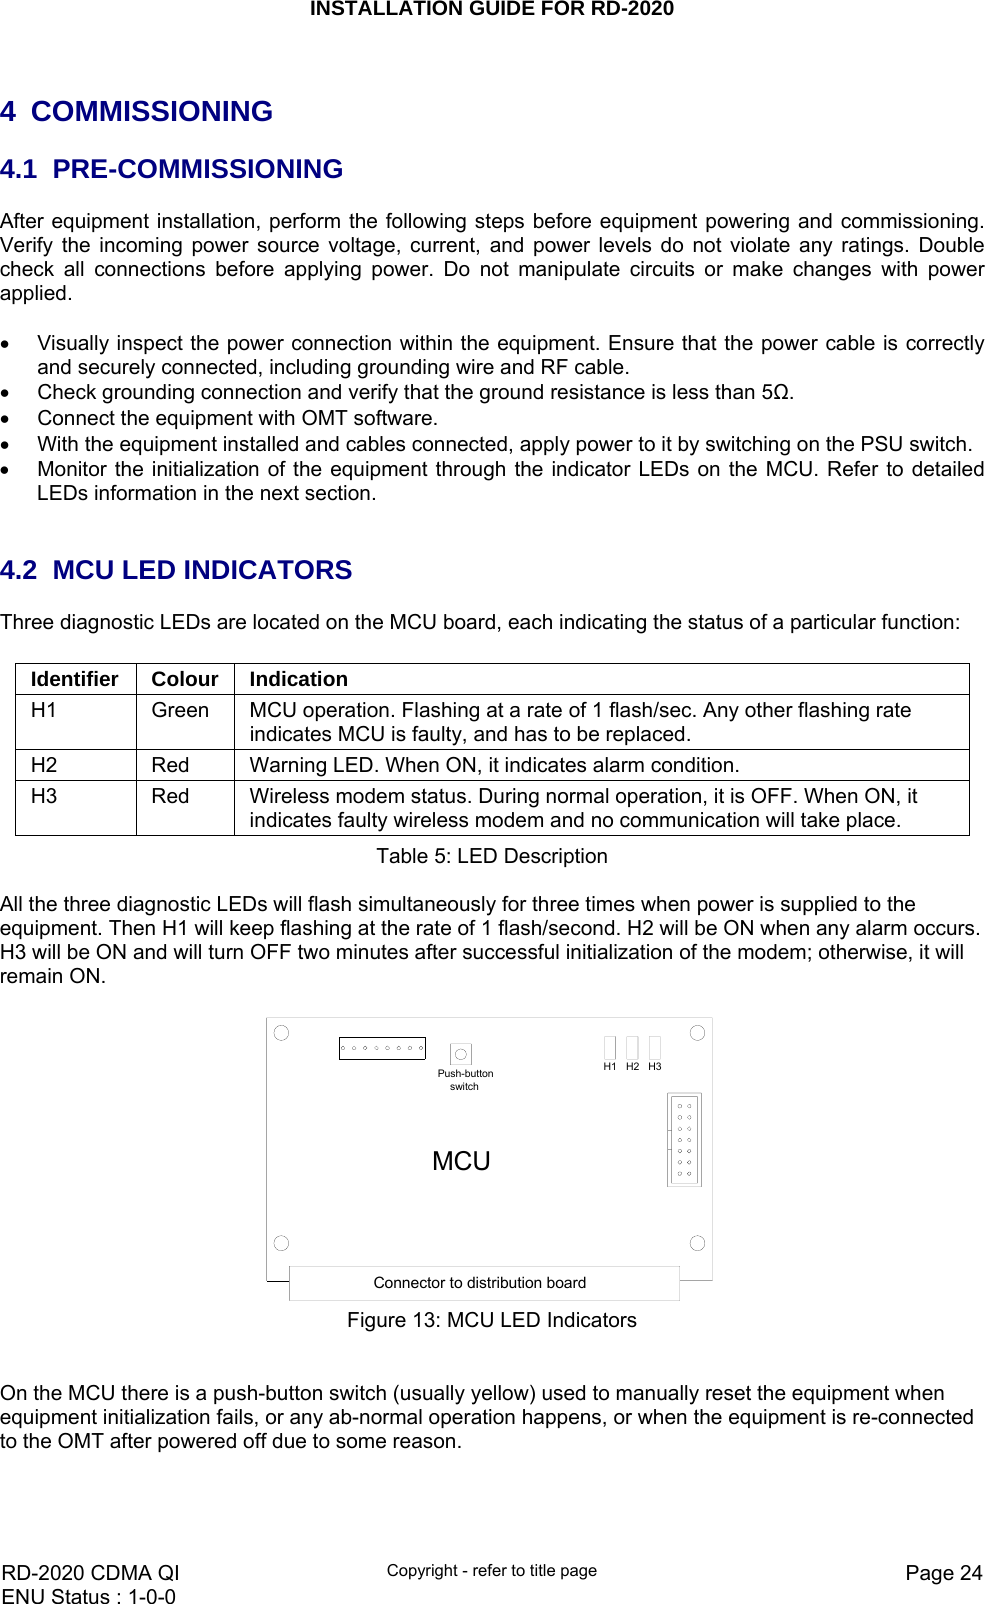 INSTALLATION GUIDE FOR RD-2020    RD-2020 CDMA QI  Copyright - refer to title page  Page 24ENU Status : 1-0-0     4 COMMISSIONING 4.1 PRE-COMMISSIONING After equipment installation, perform the following steps before equipment powering and commissioning. Verify the incoming power source voltage, current, and power levels do not violate any ratings. Double check all connections before applying power. Do not manipulate circuits or make changes with power applied.   •  Visually inspect the power connection within the equipment. Ensure that the power cable is correctly and securely connected, including grounding wire and RF cable.  •  Check grounding connection and verify that the ground resistance is less than 5Ω. •  Connect the equipment with OMT software.  •  With the equipment installed and cables connected, apply power to it by switching on the PSU switch.  •  Monitor the initialization of the equipment through the indicator LEDs on the MCU. Refer to detailed LEDs information in the next section.   4.2  MCU LED INDICATORS Three diagnostic LEDs are located on the MCU board, each indicating the status of a particular function:  Identifier Colour Indication H1  Green  MCU operation. Flashing at a rate of 1 flash/sec. Any other flashing rate indicates MCU is faulty, and has to be replaced. H2  Red  Warning LED. When ON, it indicates alarm condition. H3  Red  Wireless modem status. During normal operation, it is OFF. When ON, it indicates faulty wireless modem and no communication will take place. Table 5: LED Description  All the three diagnostic LEDs will flash simultaneously for three times when power is supplied to the equipment. Then H1 will keep flashing at the rate of 1 flash/second. H2 will be ON when any alarm occurs. H3 will be ON and will turn OFF two minutes after successful initialization of the modem; otherwise, it will remain ON. H3H2H1MCUConnector to distribution boardPush-button     switch Figure 13: MCU LED Indicators   On the MCU there is a push-button switch (usually yellow) used to manually reset the equipment when equipment initialization fails, or any ab-normal operation happens, or when the equipment is re-connected to the OMT after powered off due to some reason.  